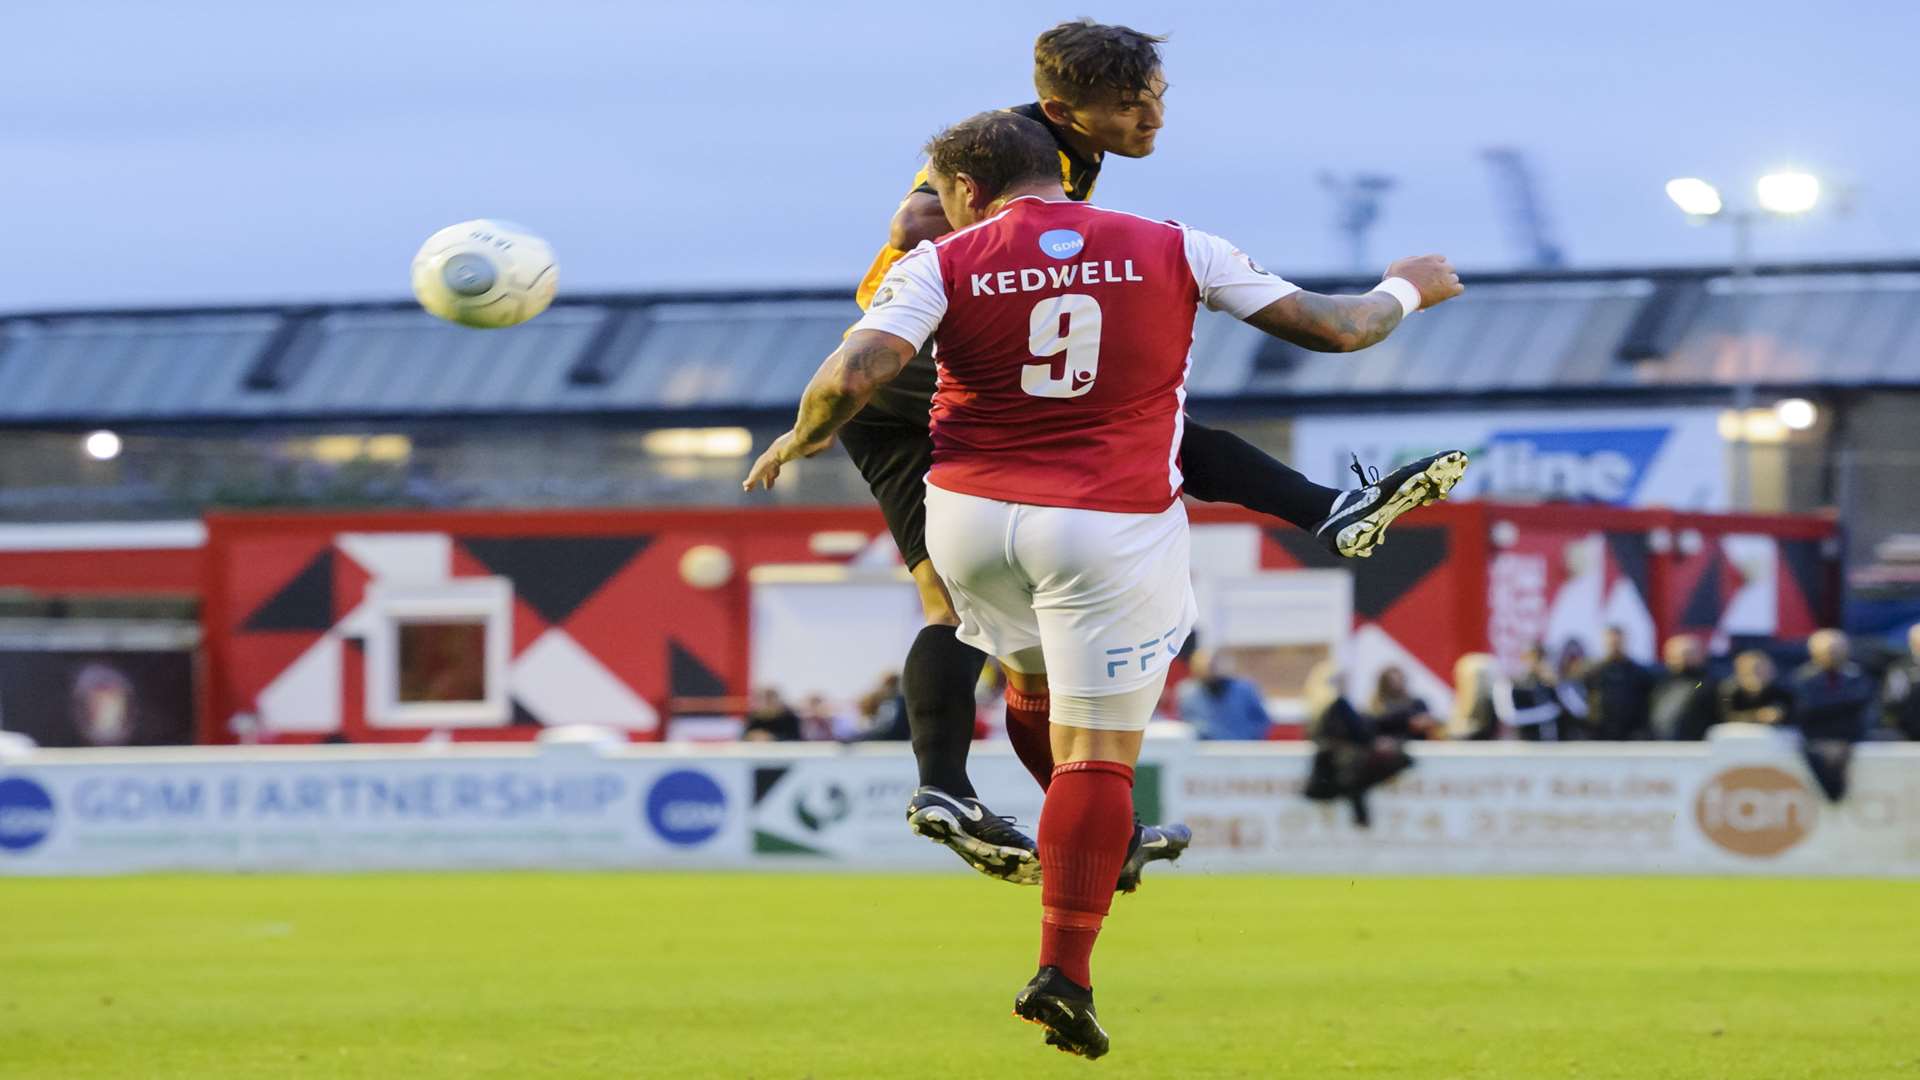 Danny Kedwell wins a header for Ebbsfleet against Maidstone Picture: Andy Payton